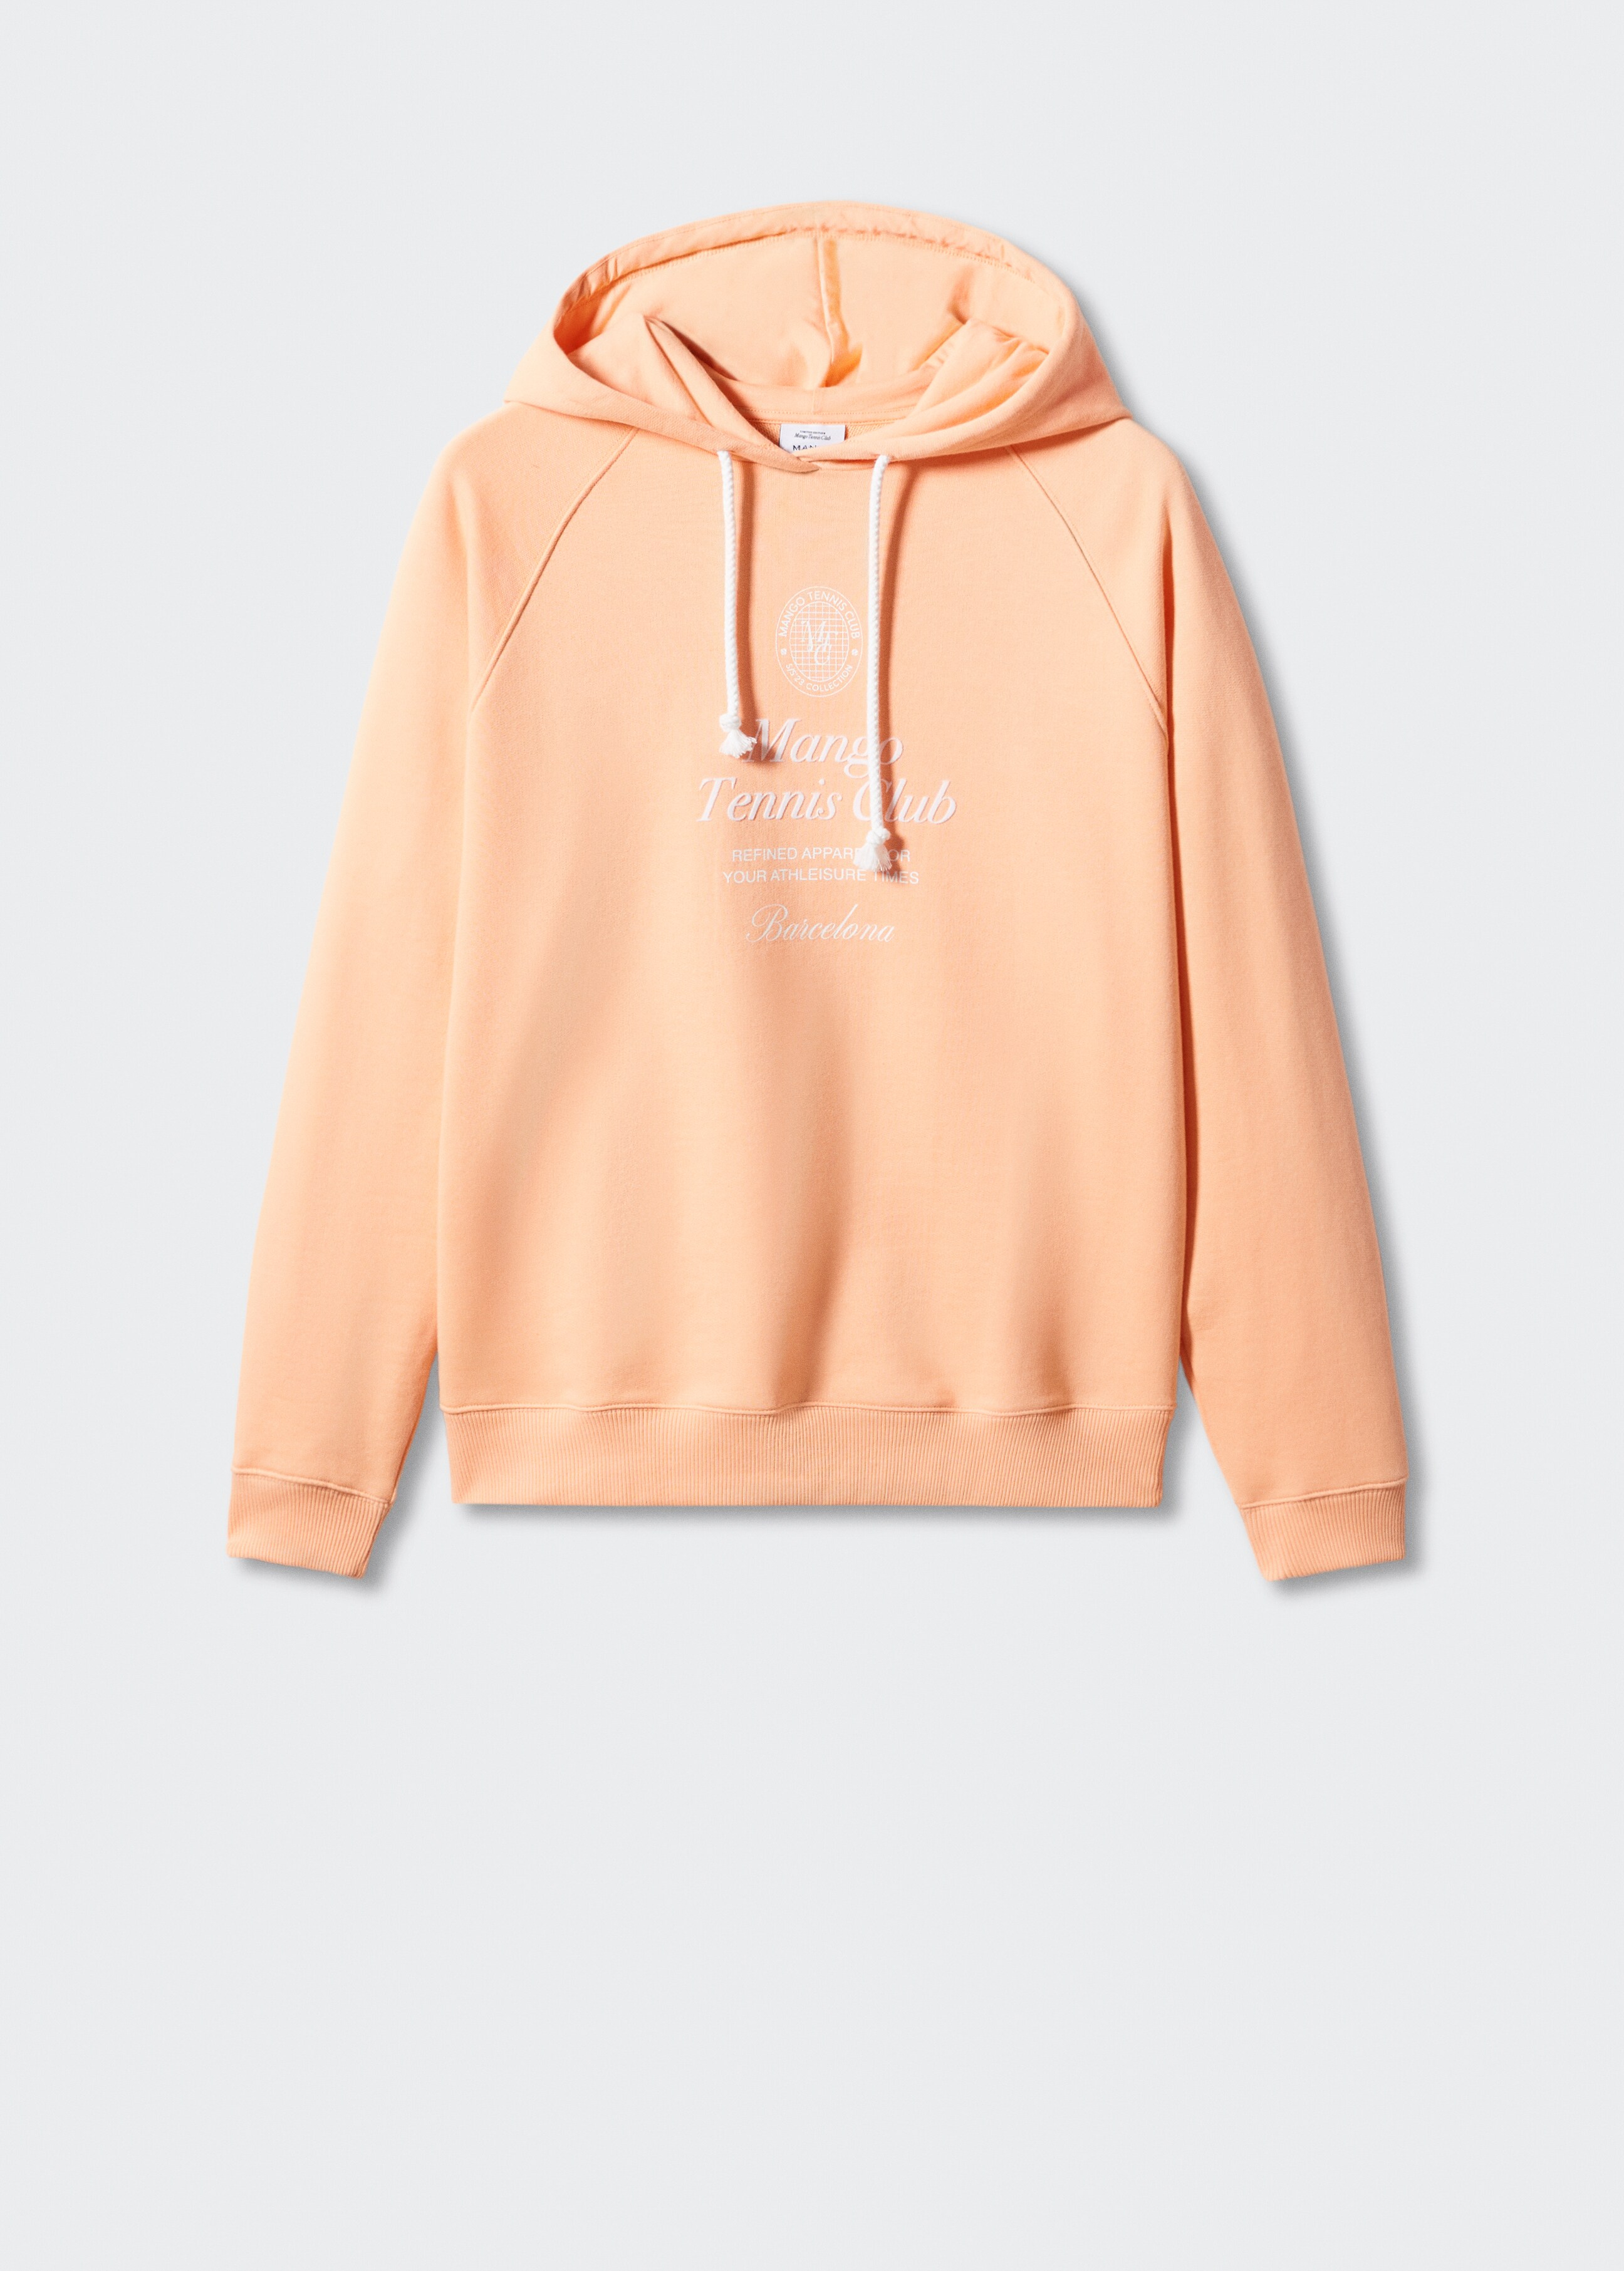 100% cotton hooded sweatshirt text - Article without model